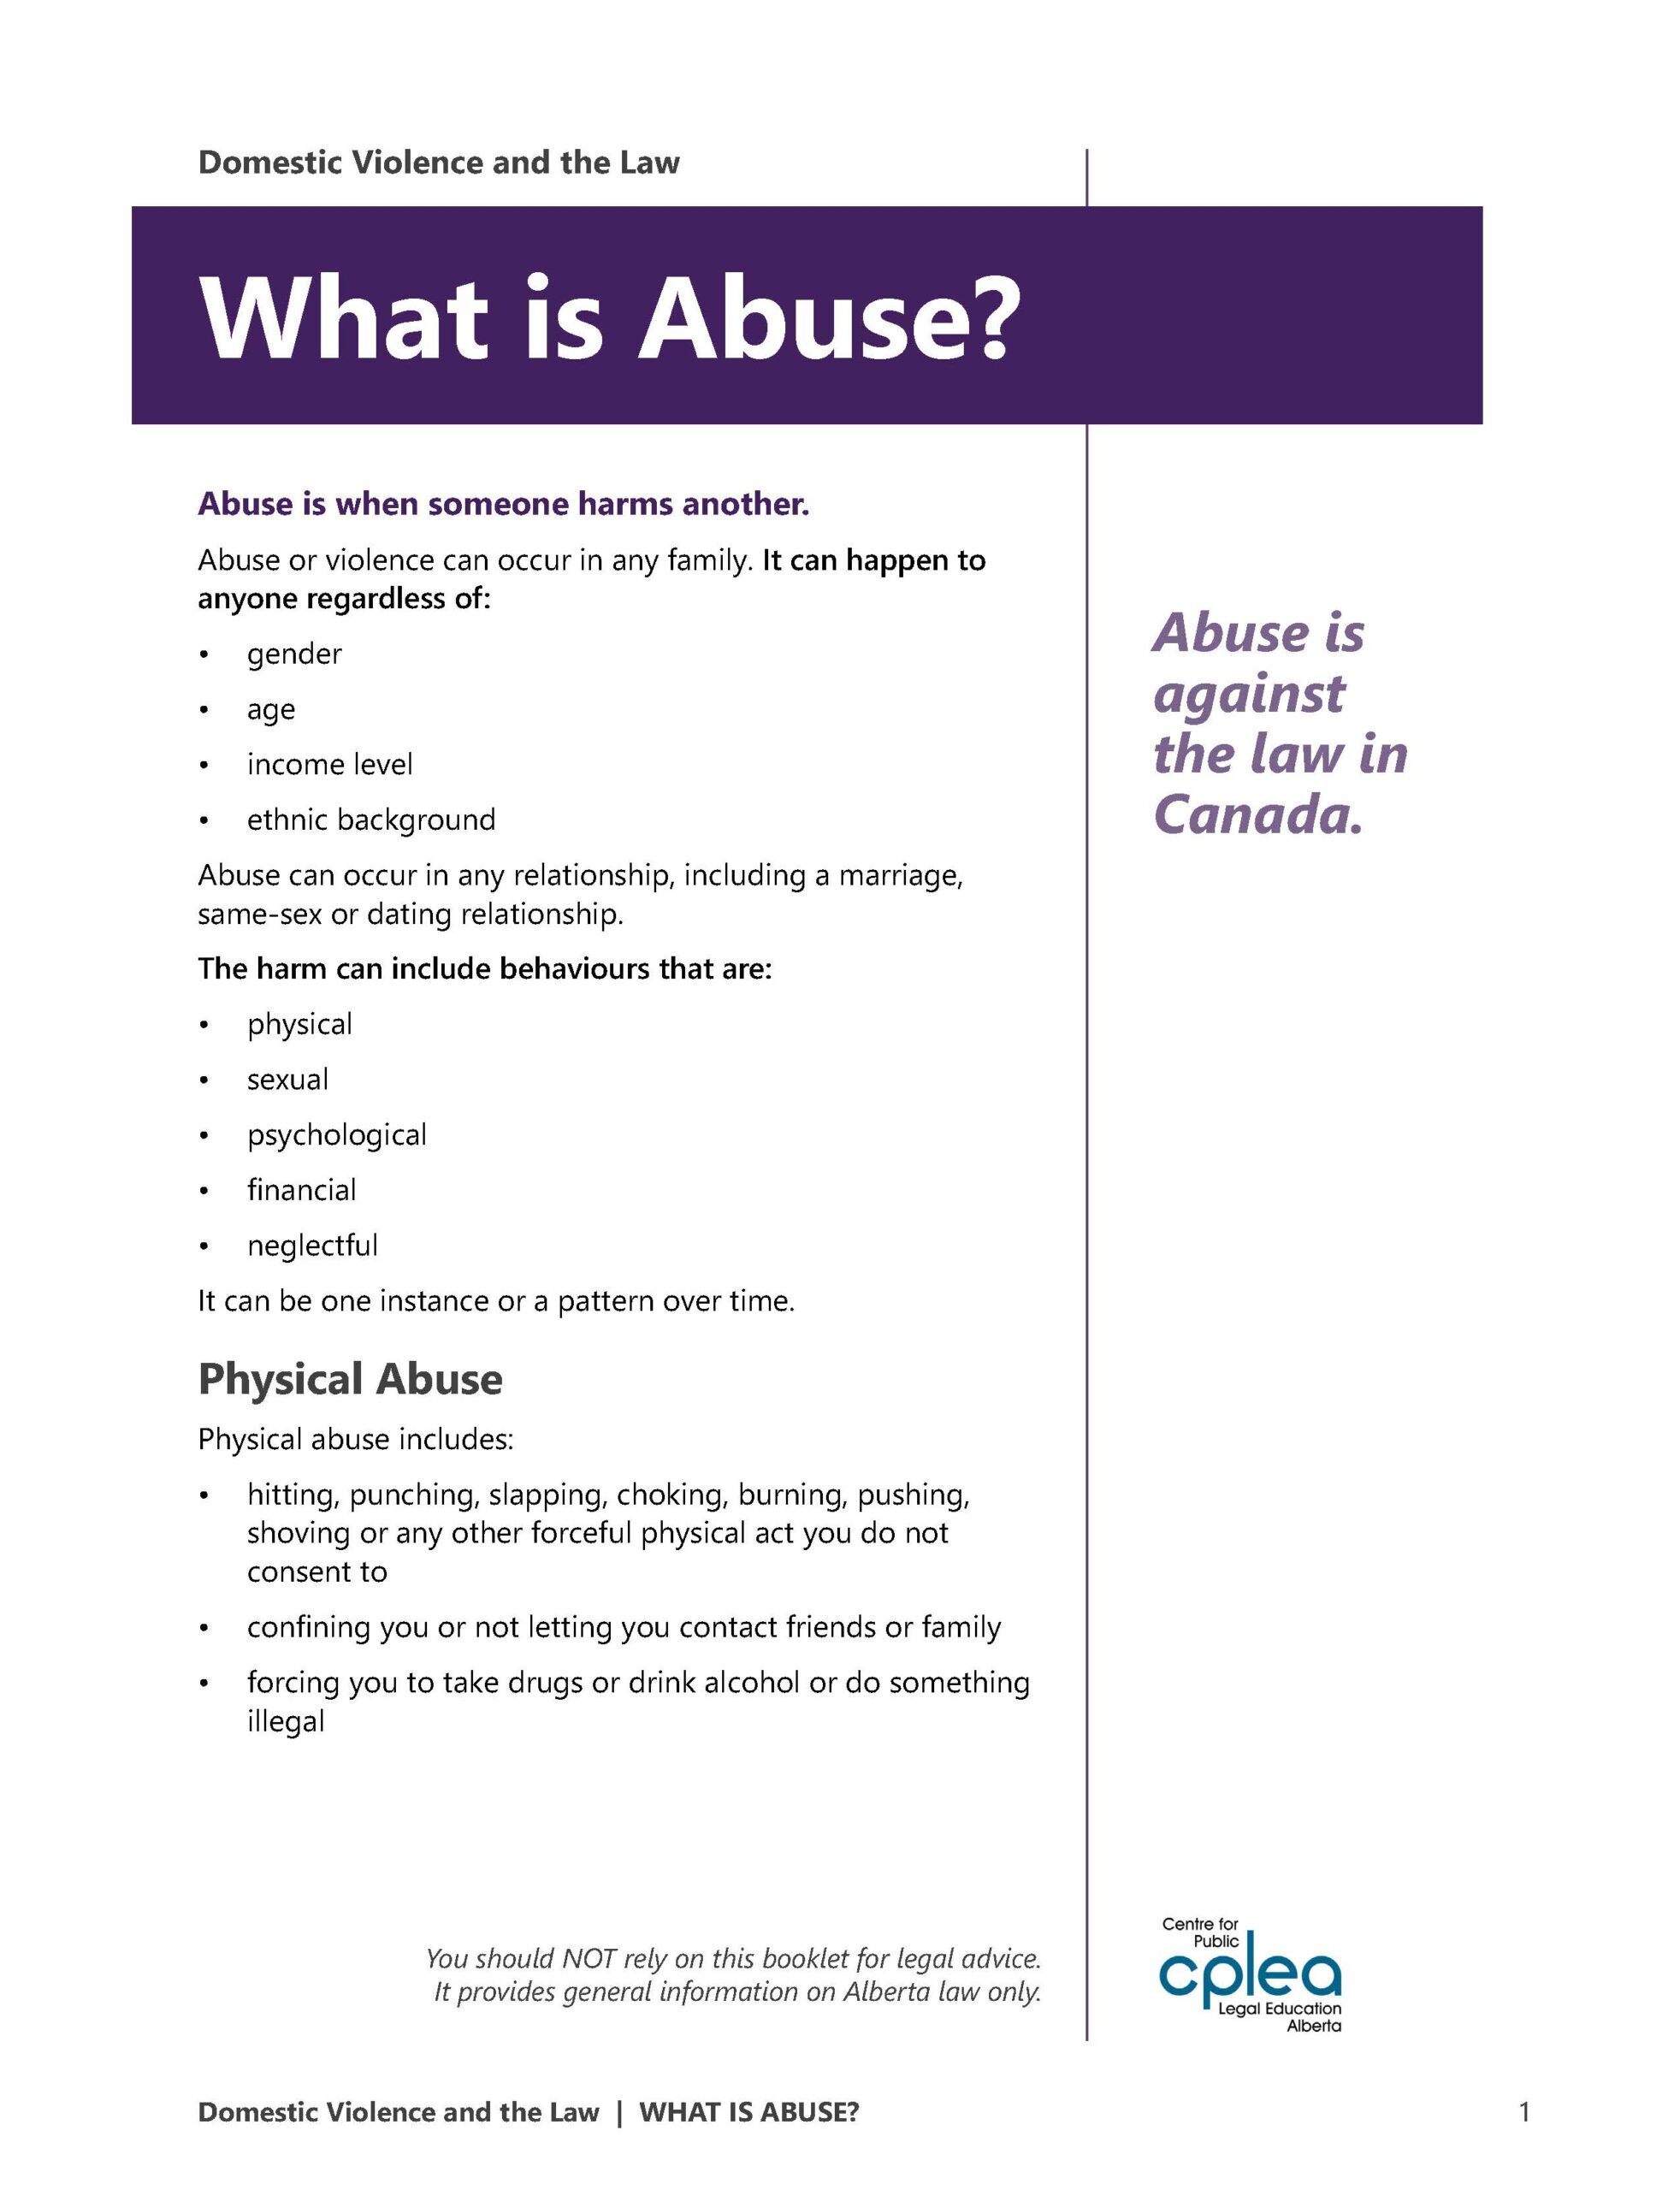 What is Abuse?